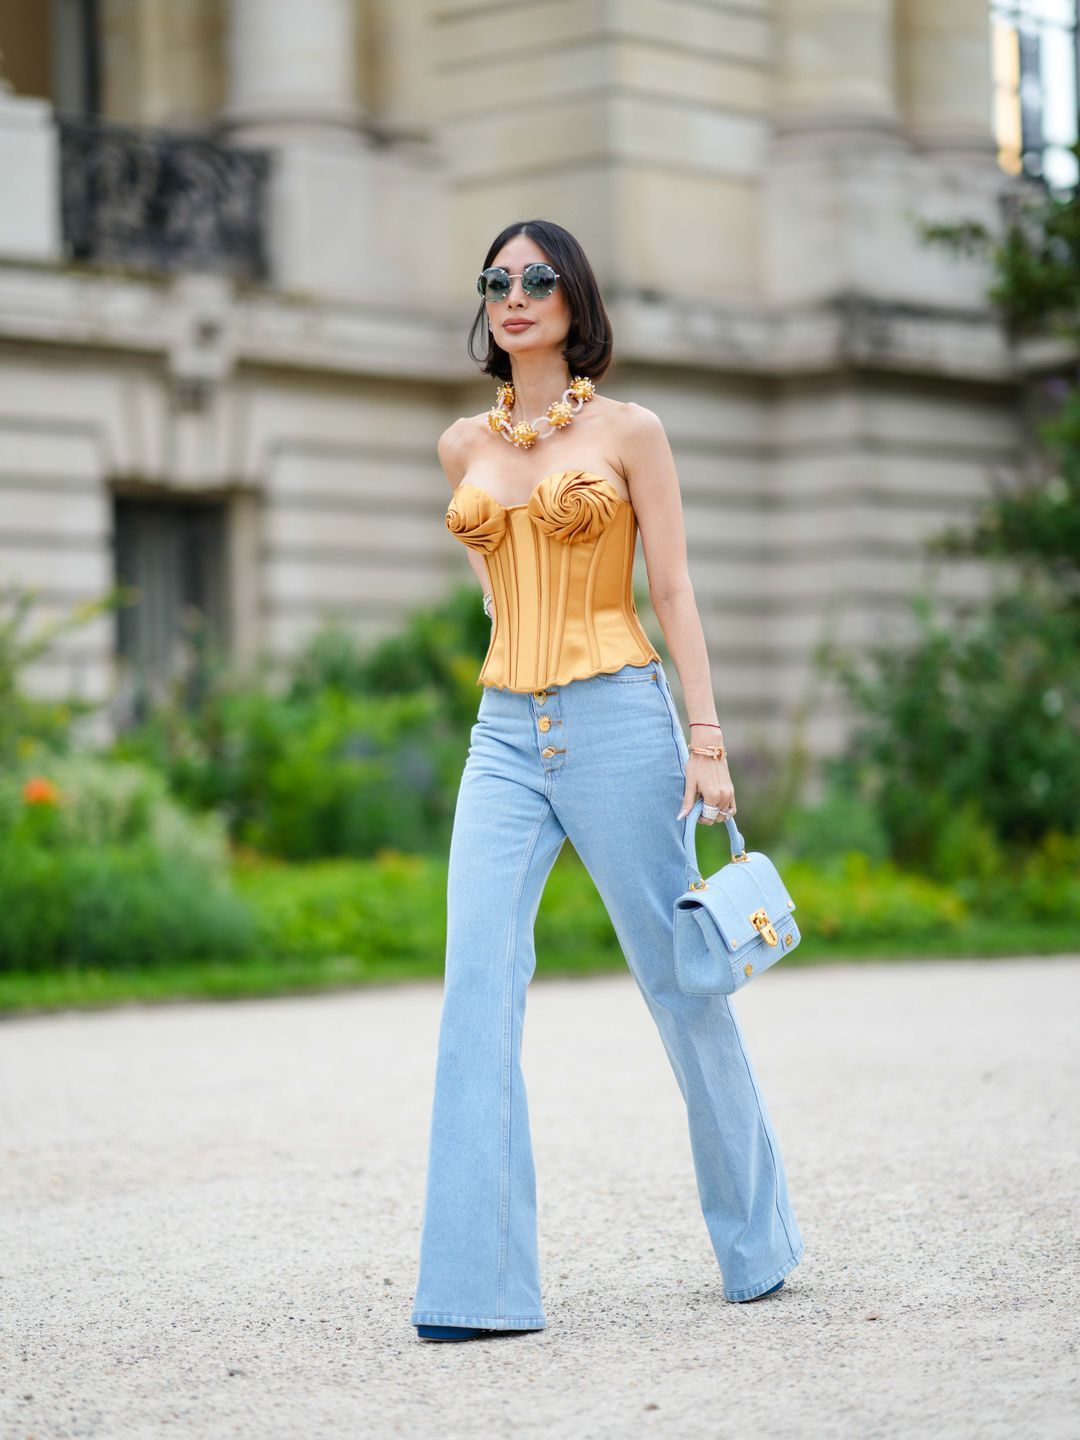 Heart Evangelista wearing pale blue flares with a gold corset 